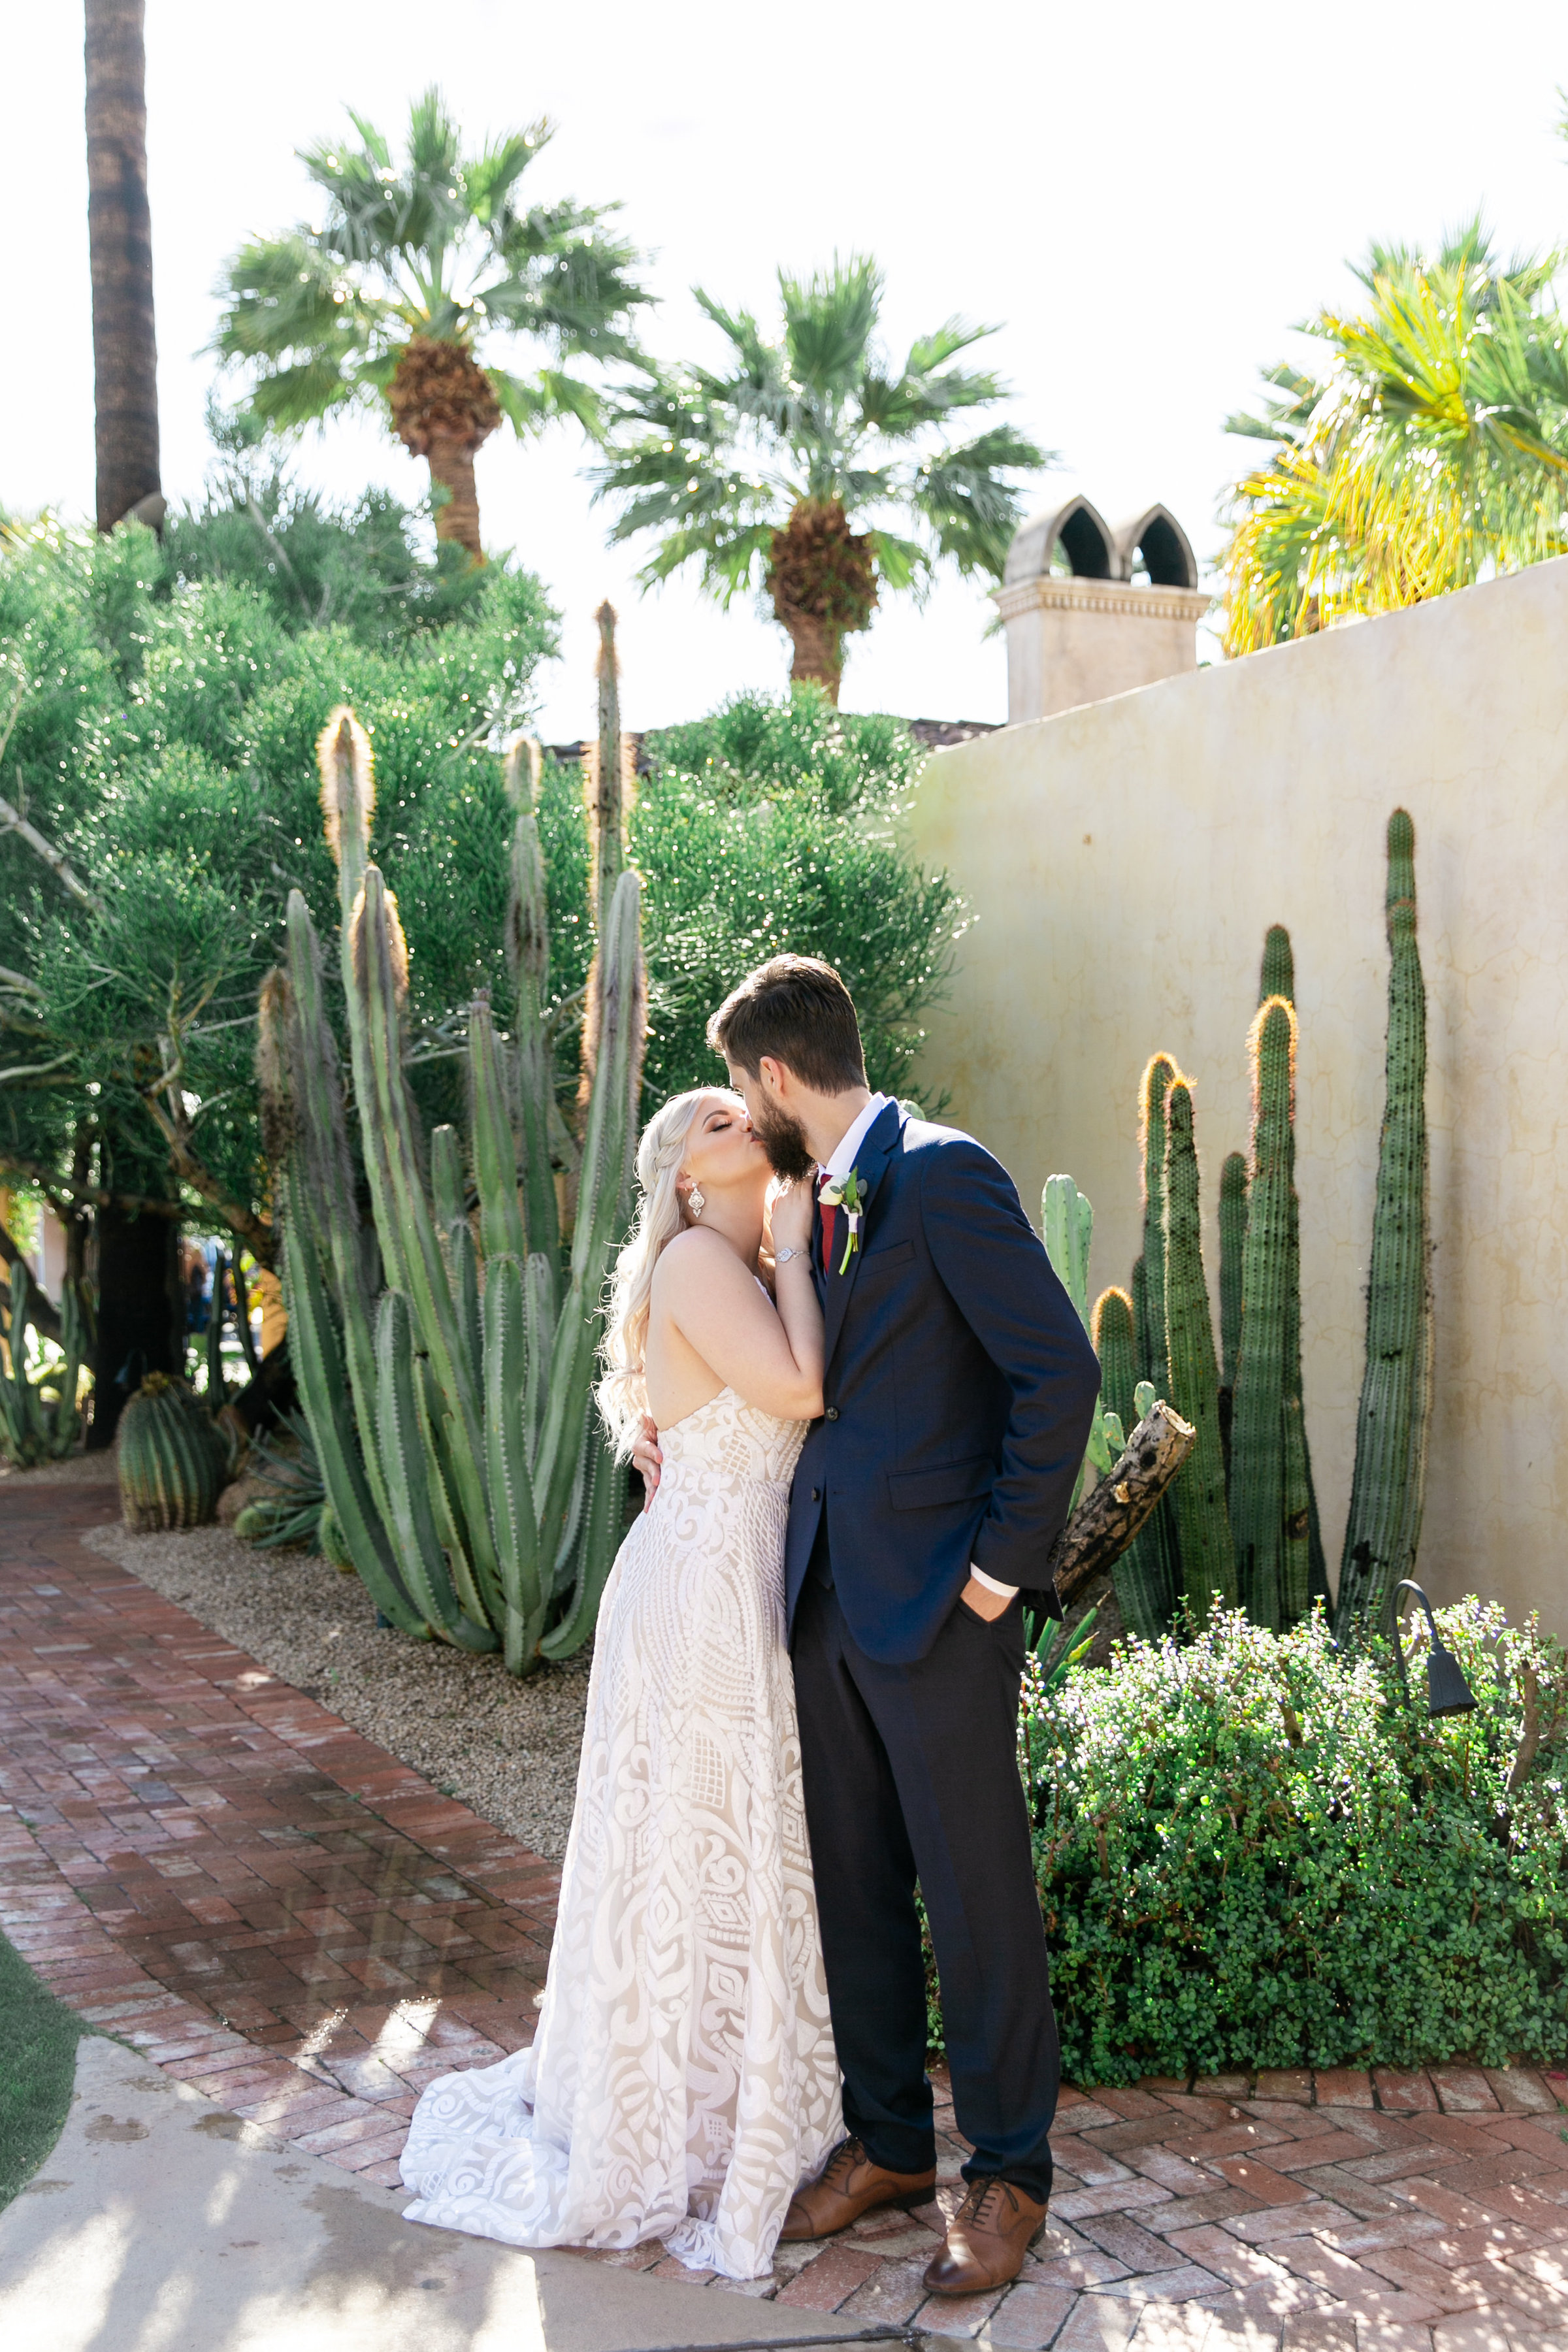 Karlie Colleen Photography - The Royal Palms Wedding - Some Like It Classic - Alex & Sam-148